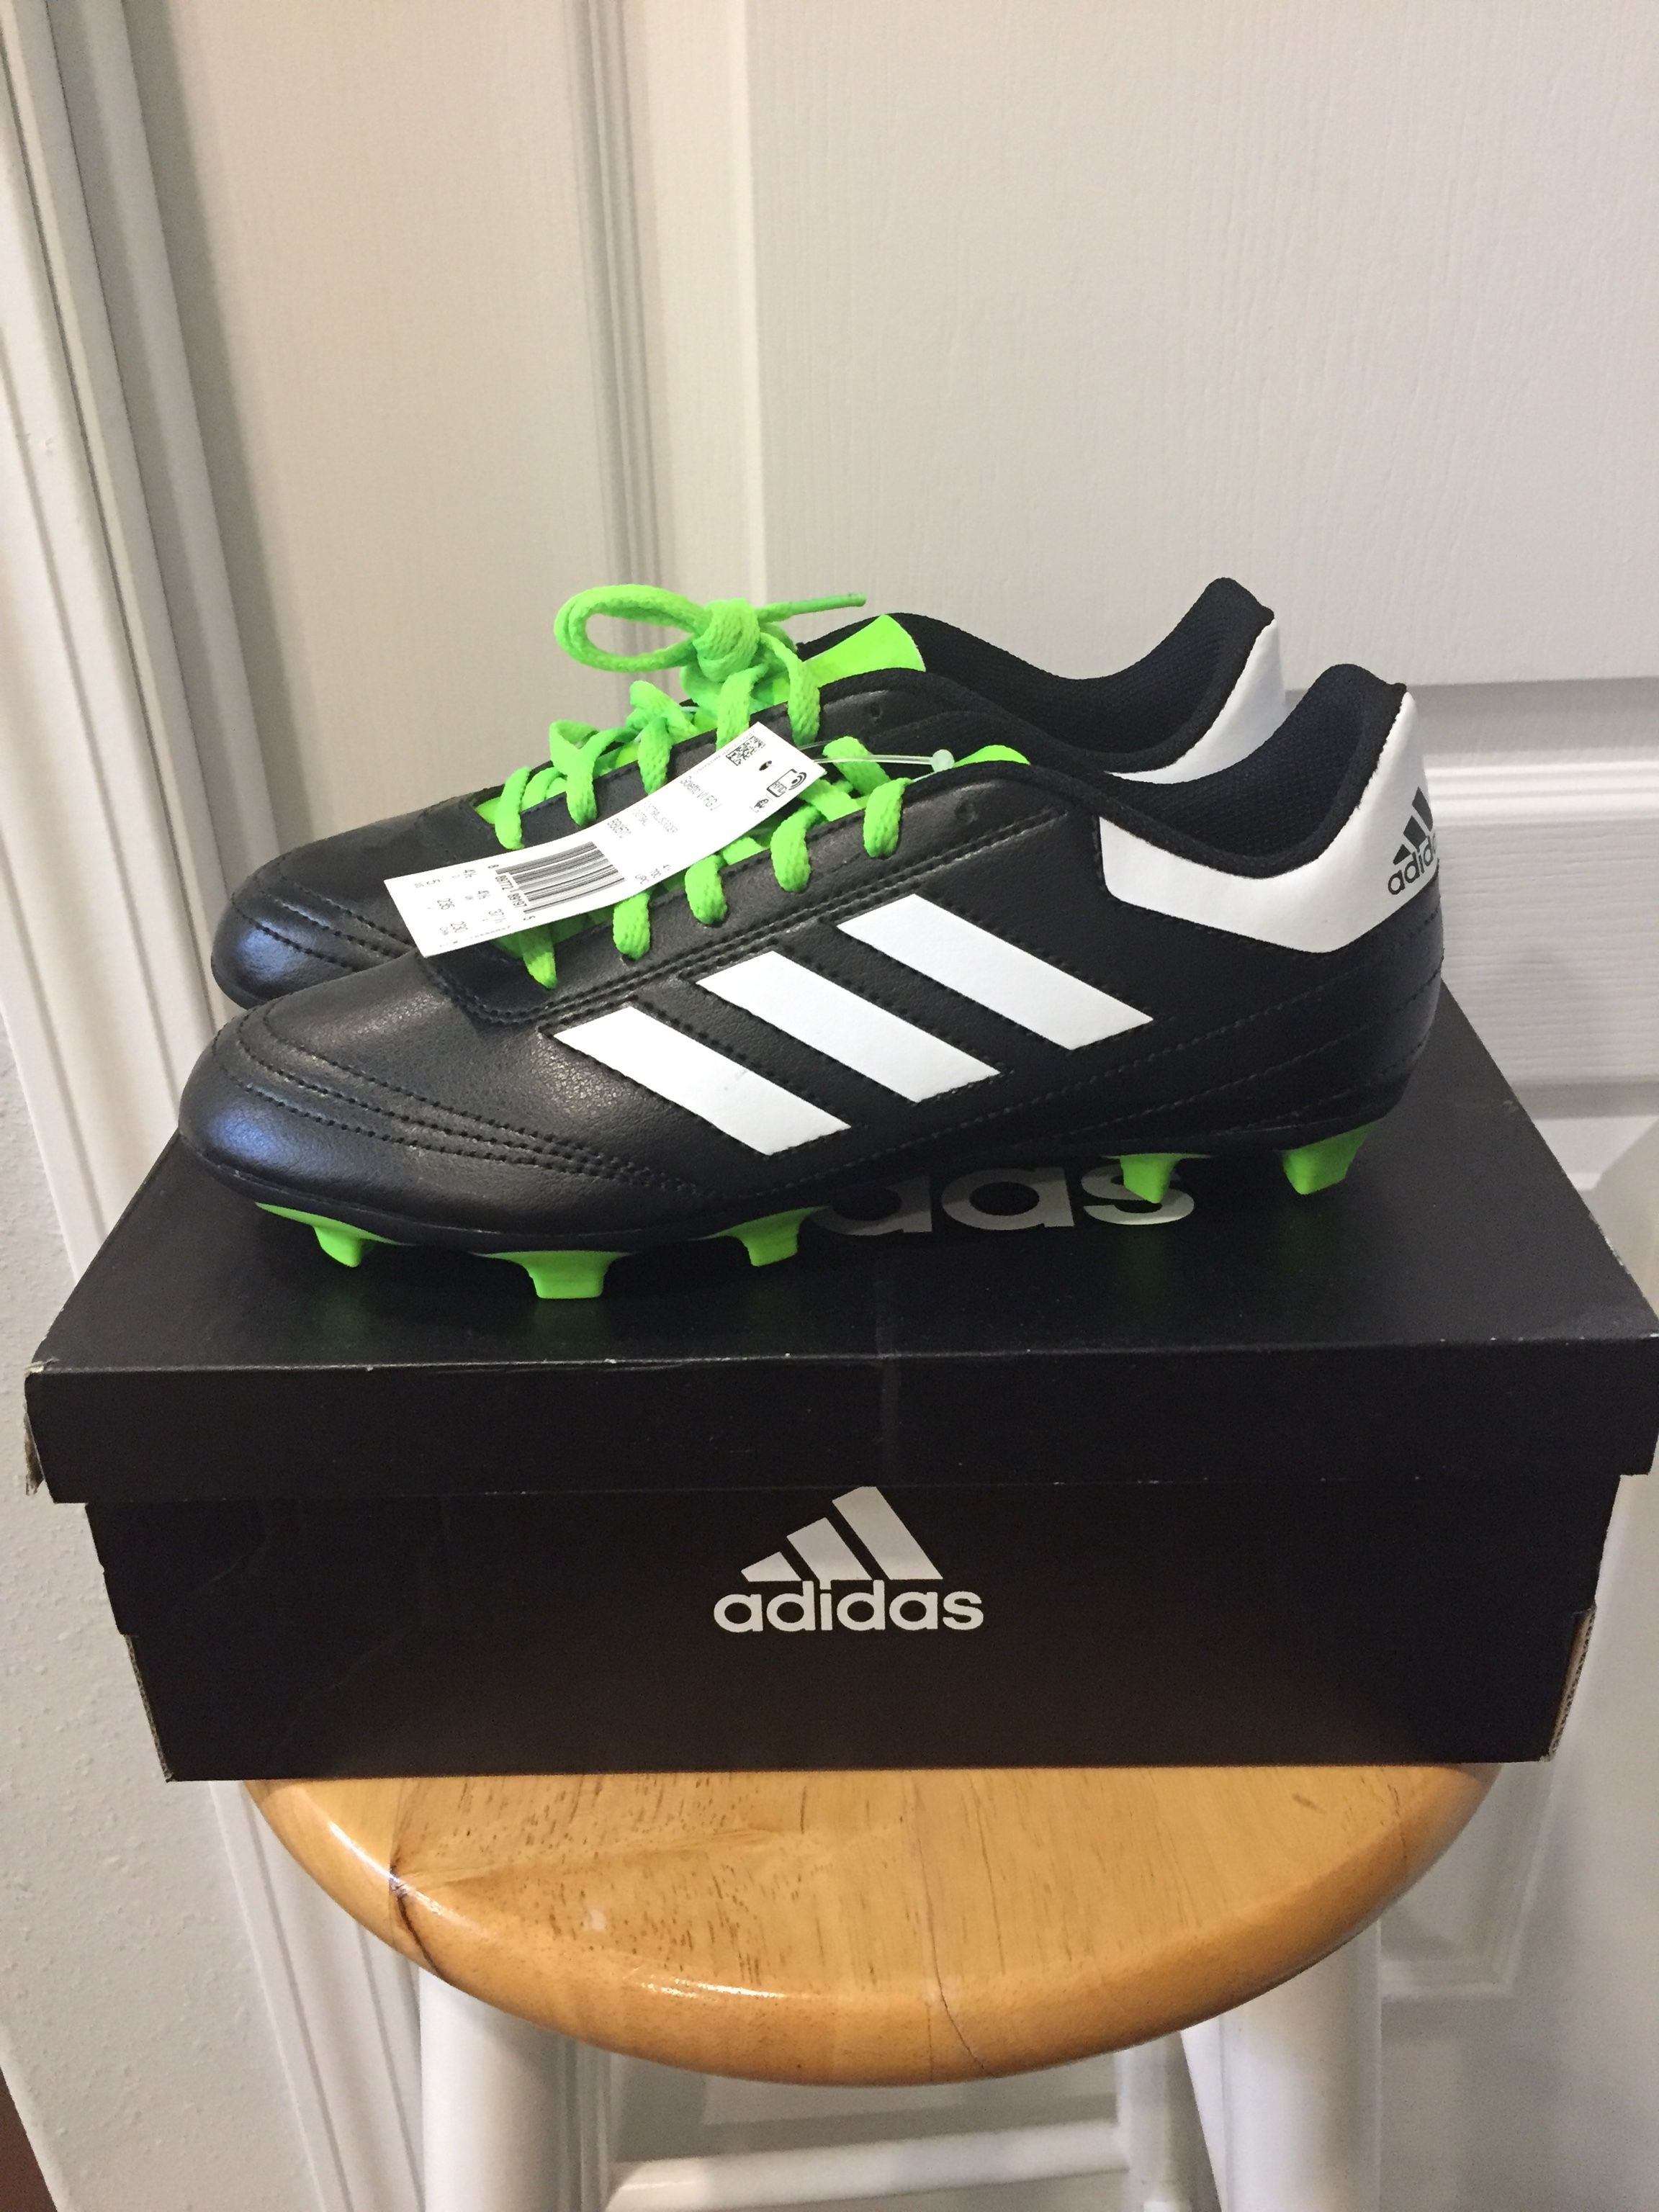 BRAND NEW BOYS ADIDAS SOCCERS SHOES! Size 5